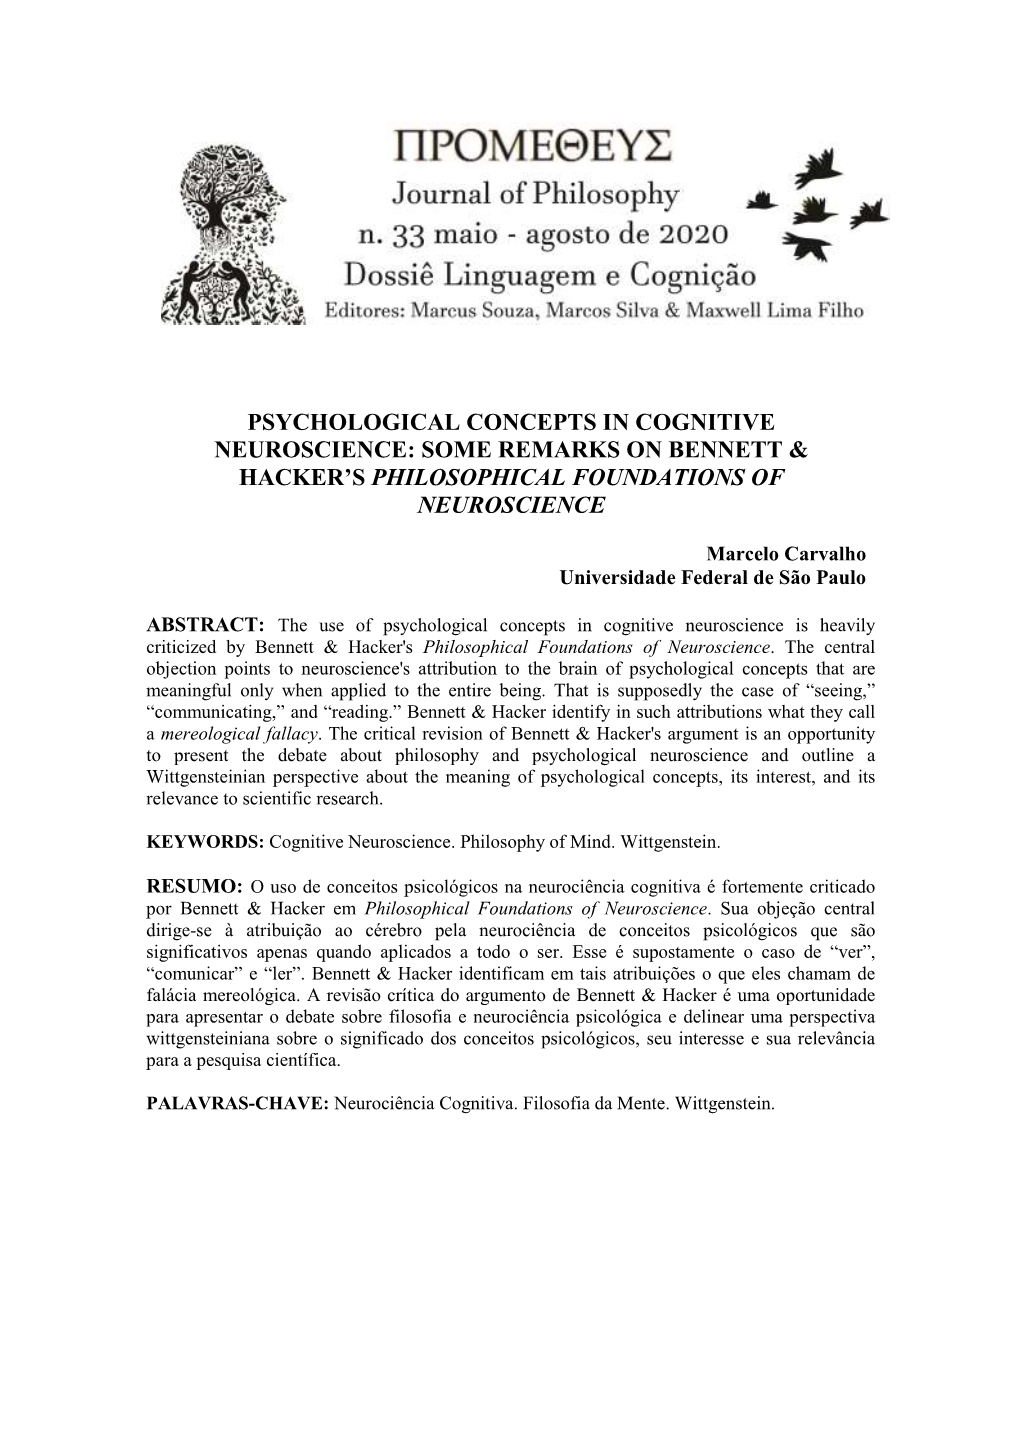 Psychological Concepts in Cognitive Neuroscience: Some Remarks on Bennett & Hacker’S Philosophical Foundations of Neuroscience